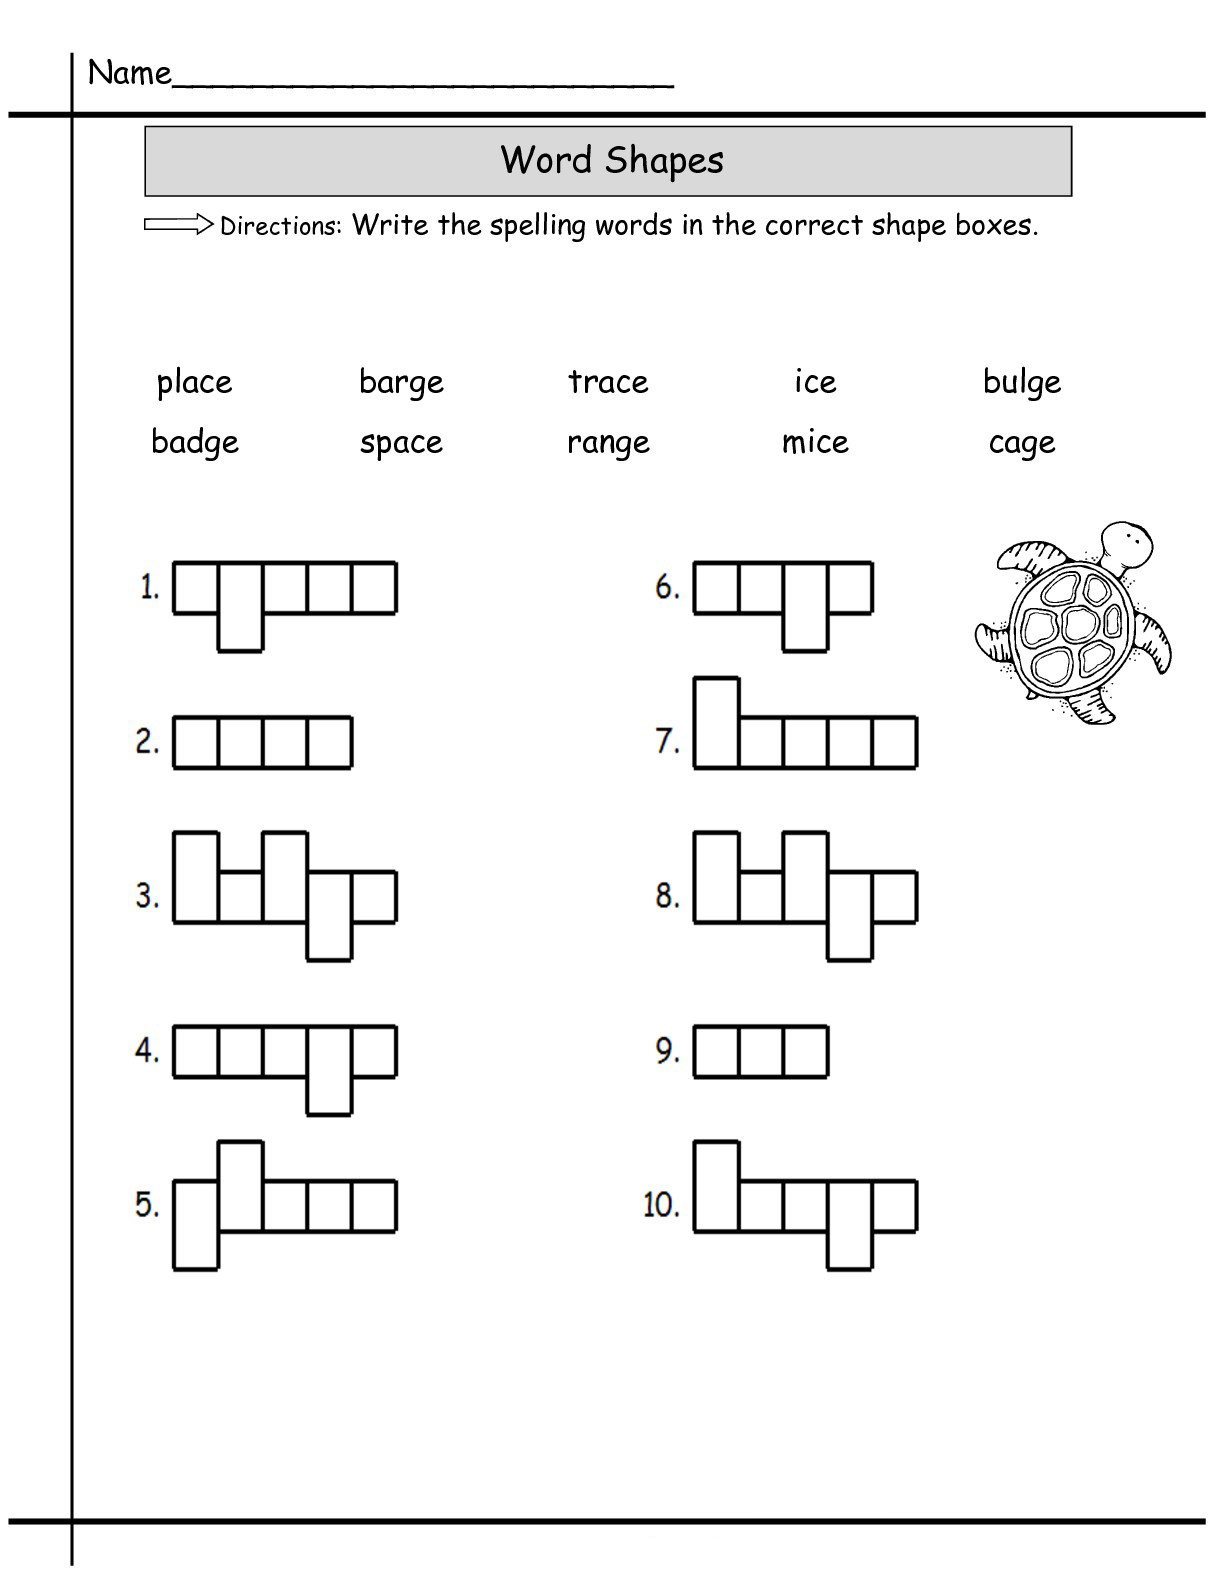 help-3rd-grader-with-spelling